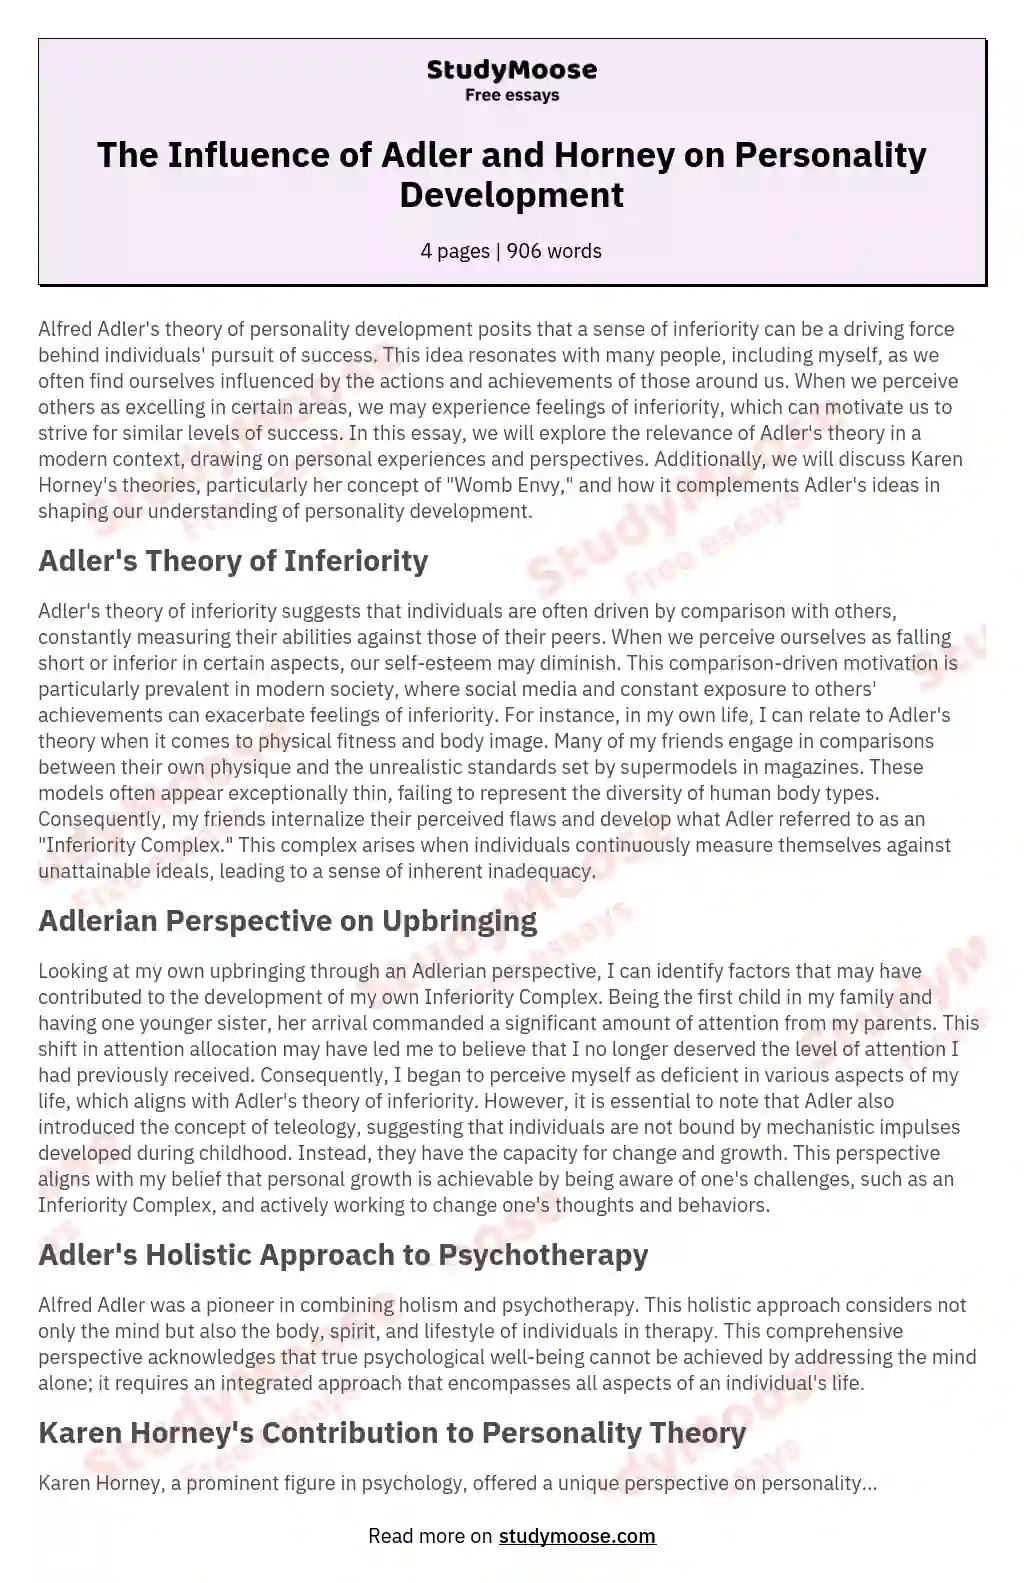 The Influence of Adler and Horney on Personality Development essay